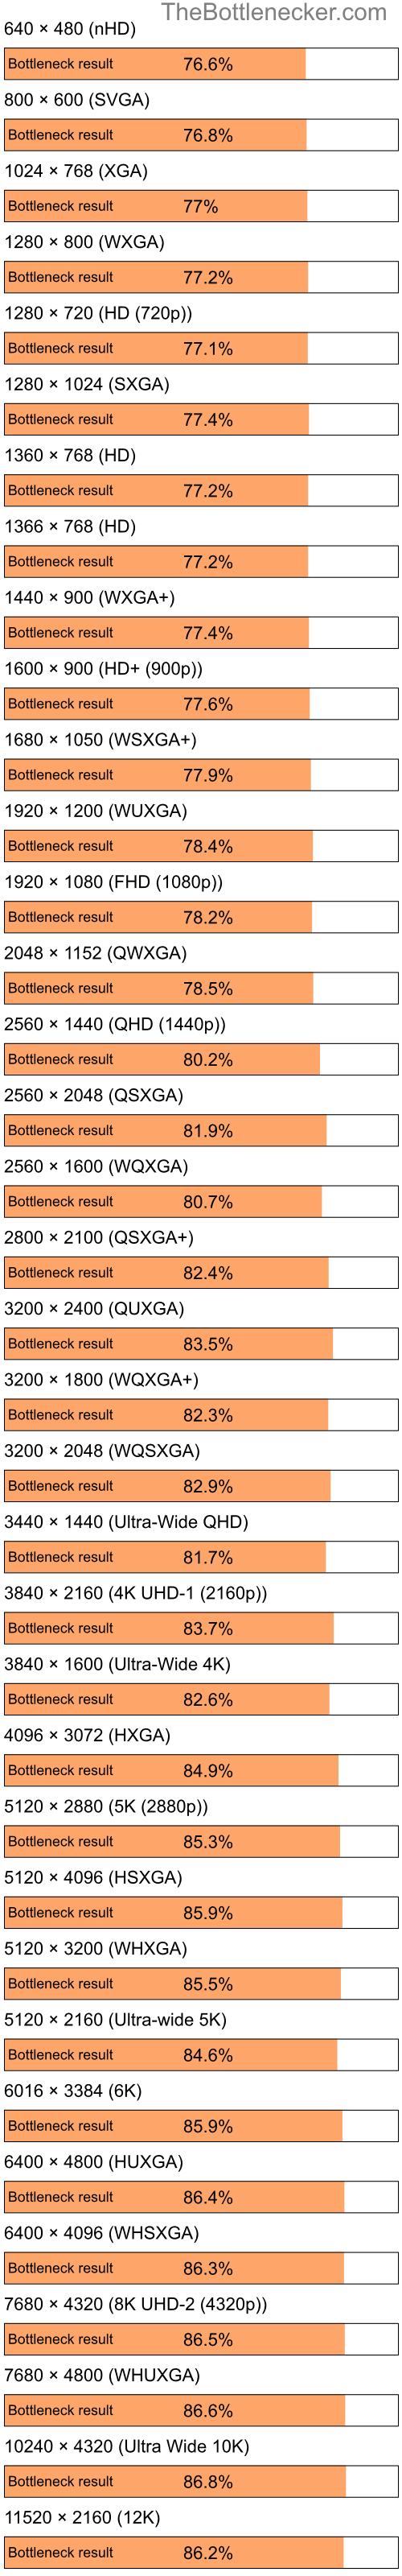 Bottleneck results by resolution for Intel Atom Z520 and AMD Radeon X1250 in7 Days to Die